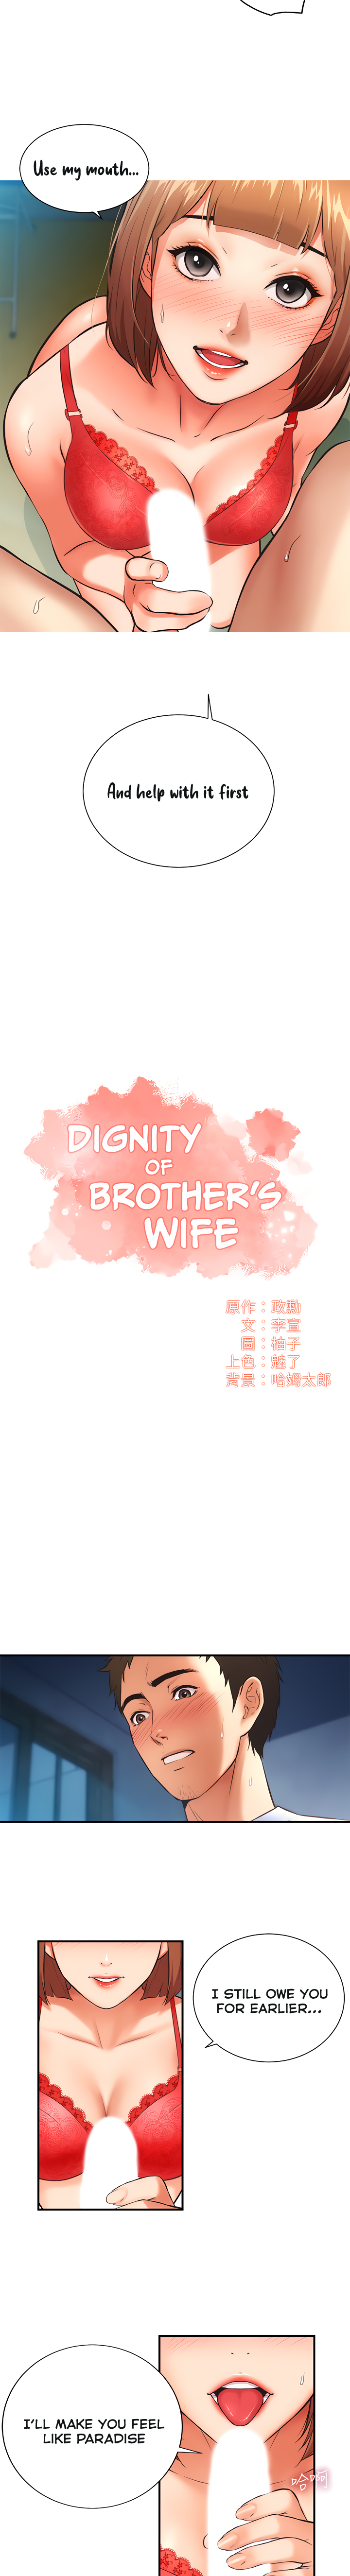 brother8217s-wife-dignity-chap-7-1